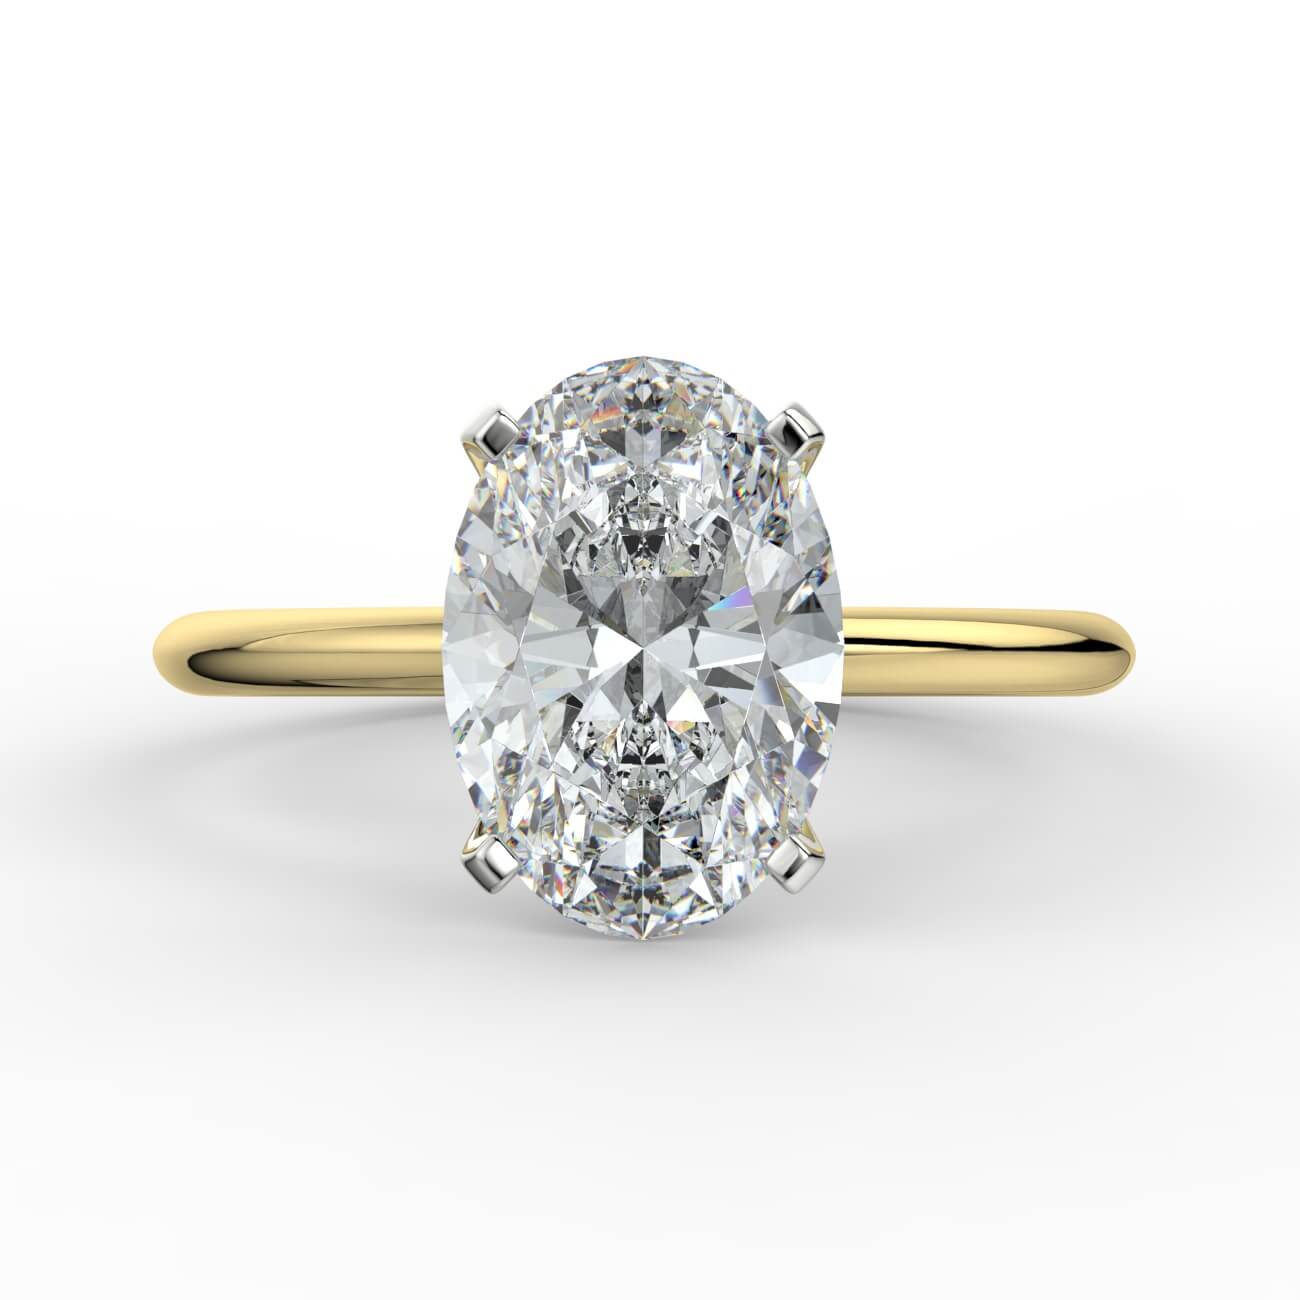 Knife-edge solitaire oval diamond engagement ring in yellow and white gold – Australian Diamond Network